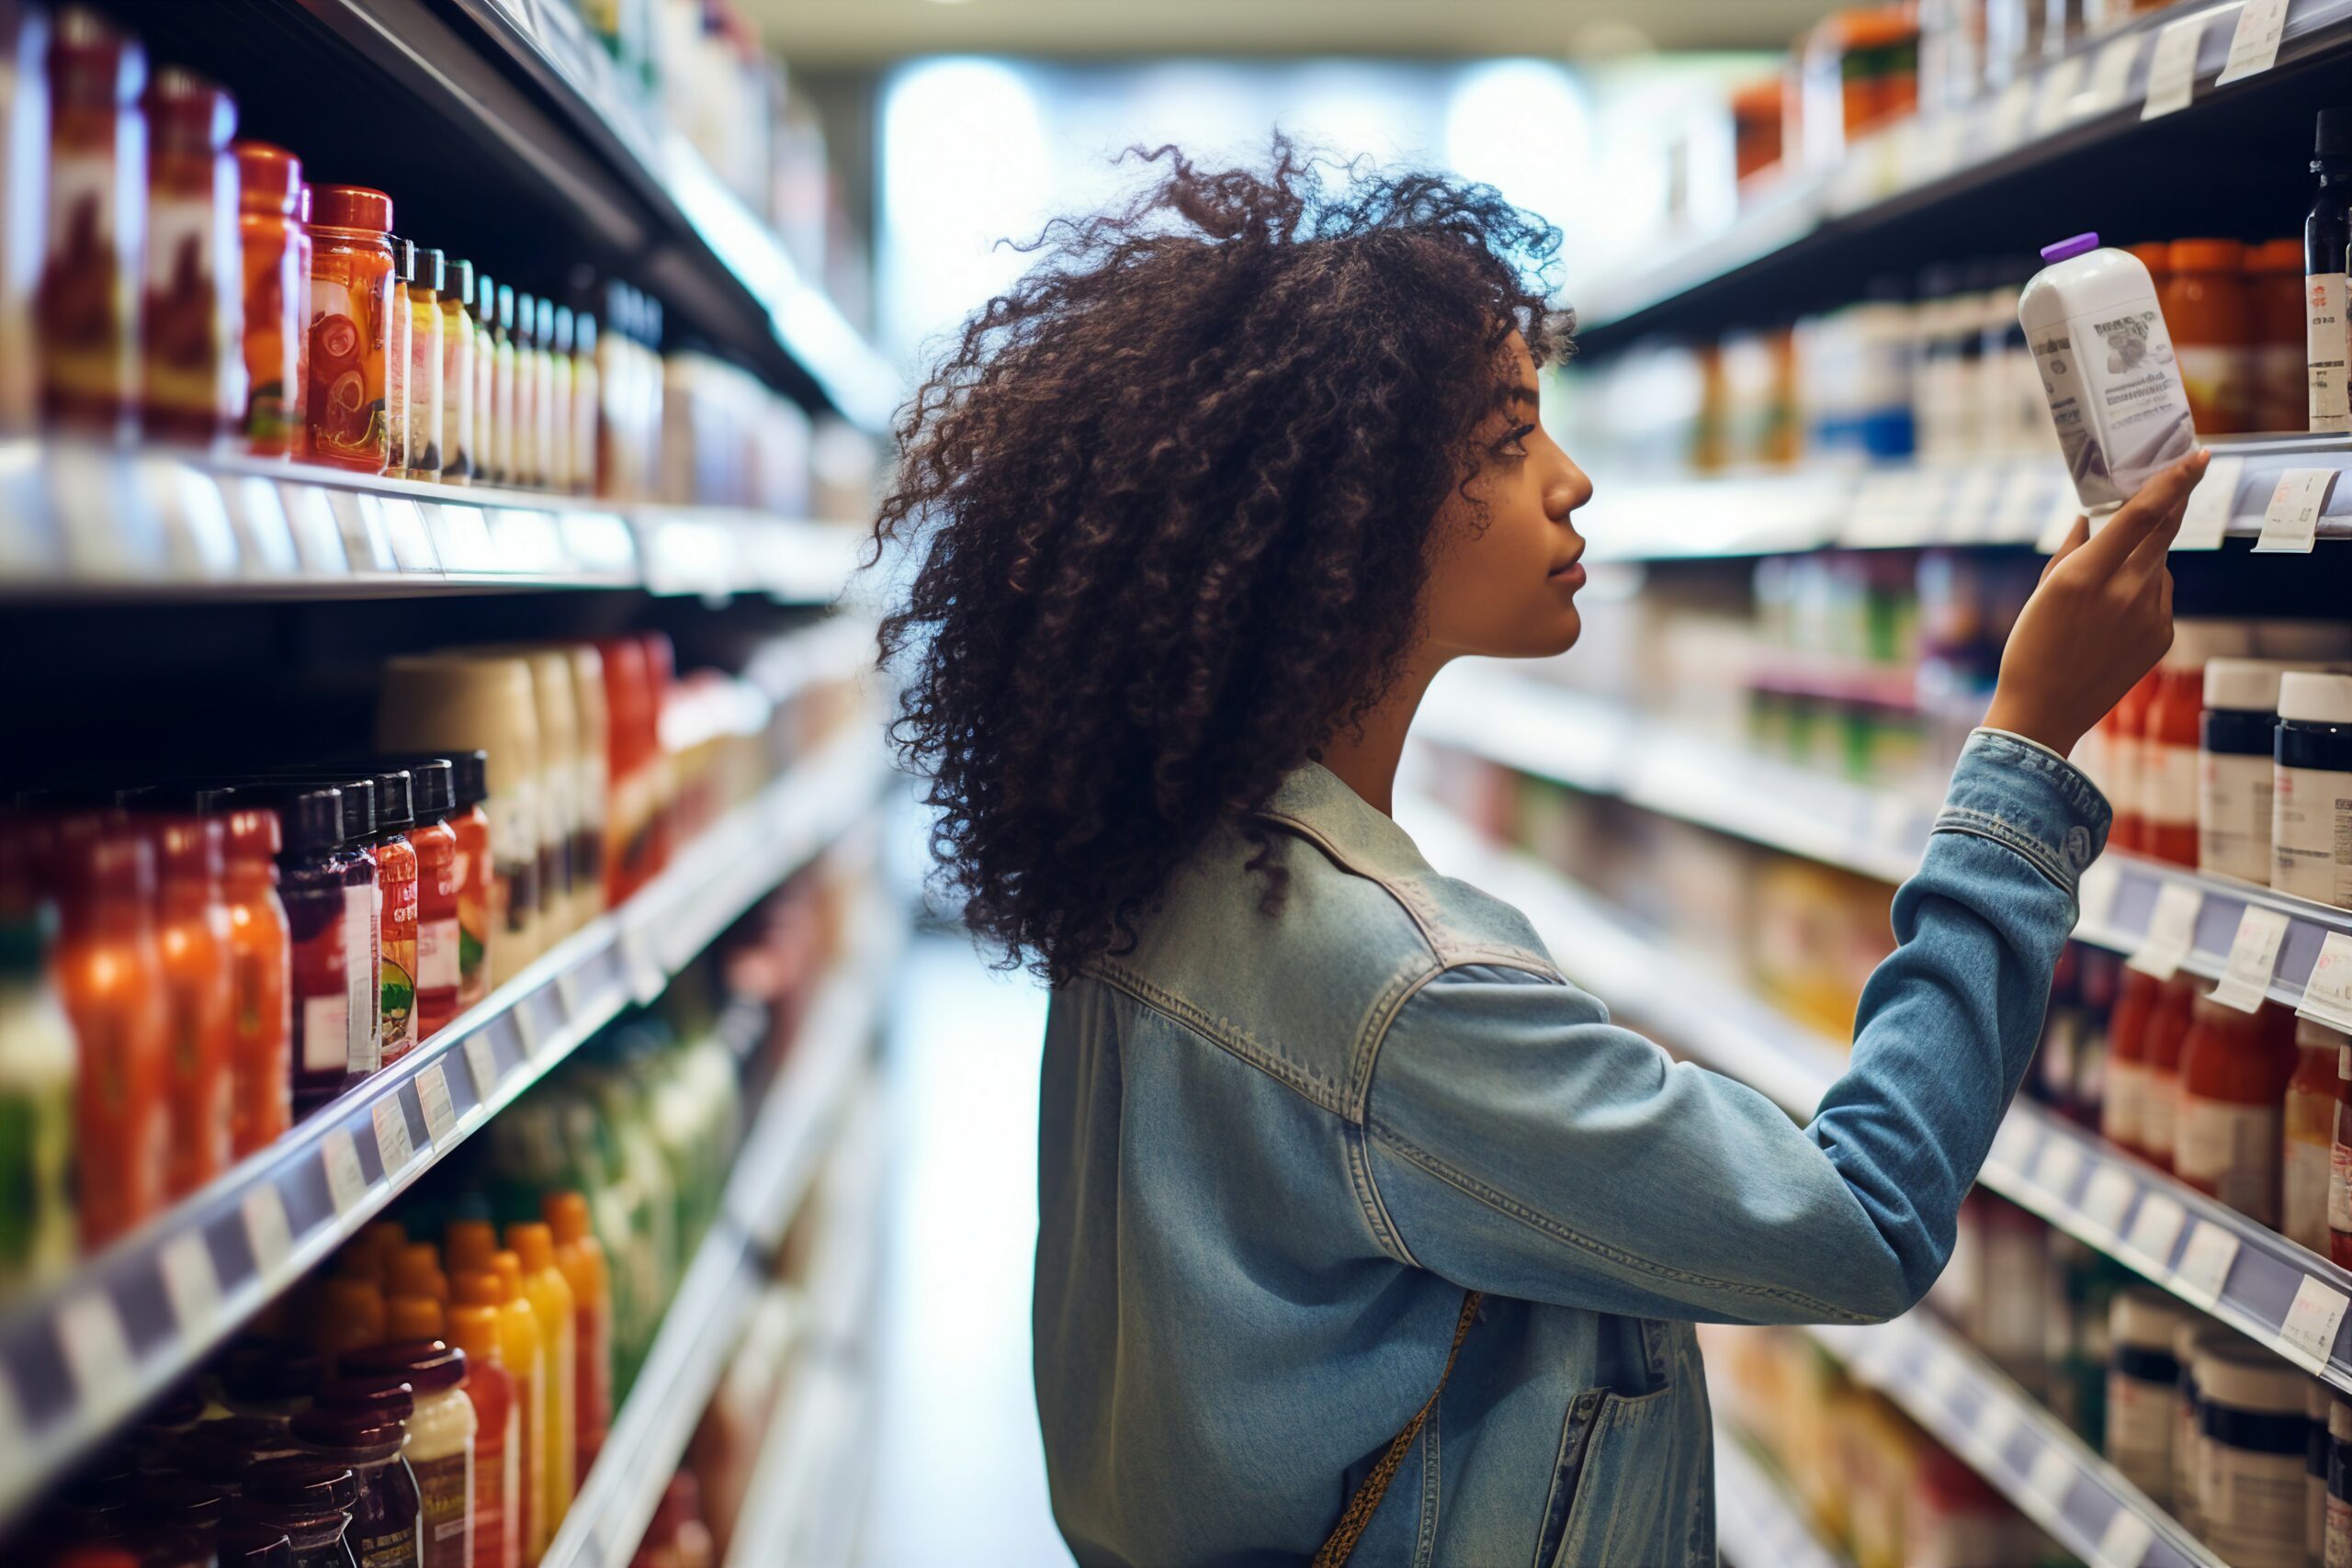 A black woman with frizzy hair is shopping in the aisle of a store that sells consumer products.